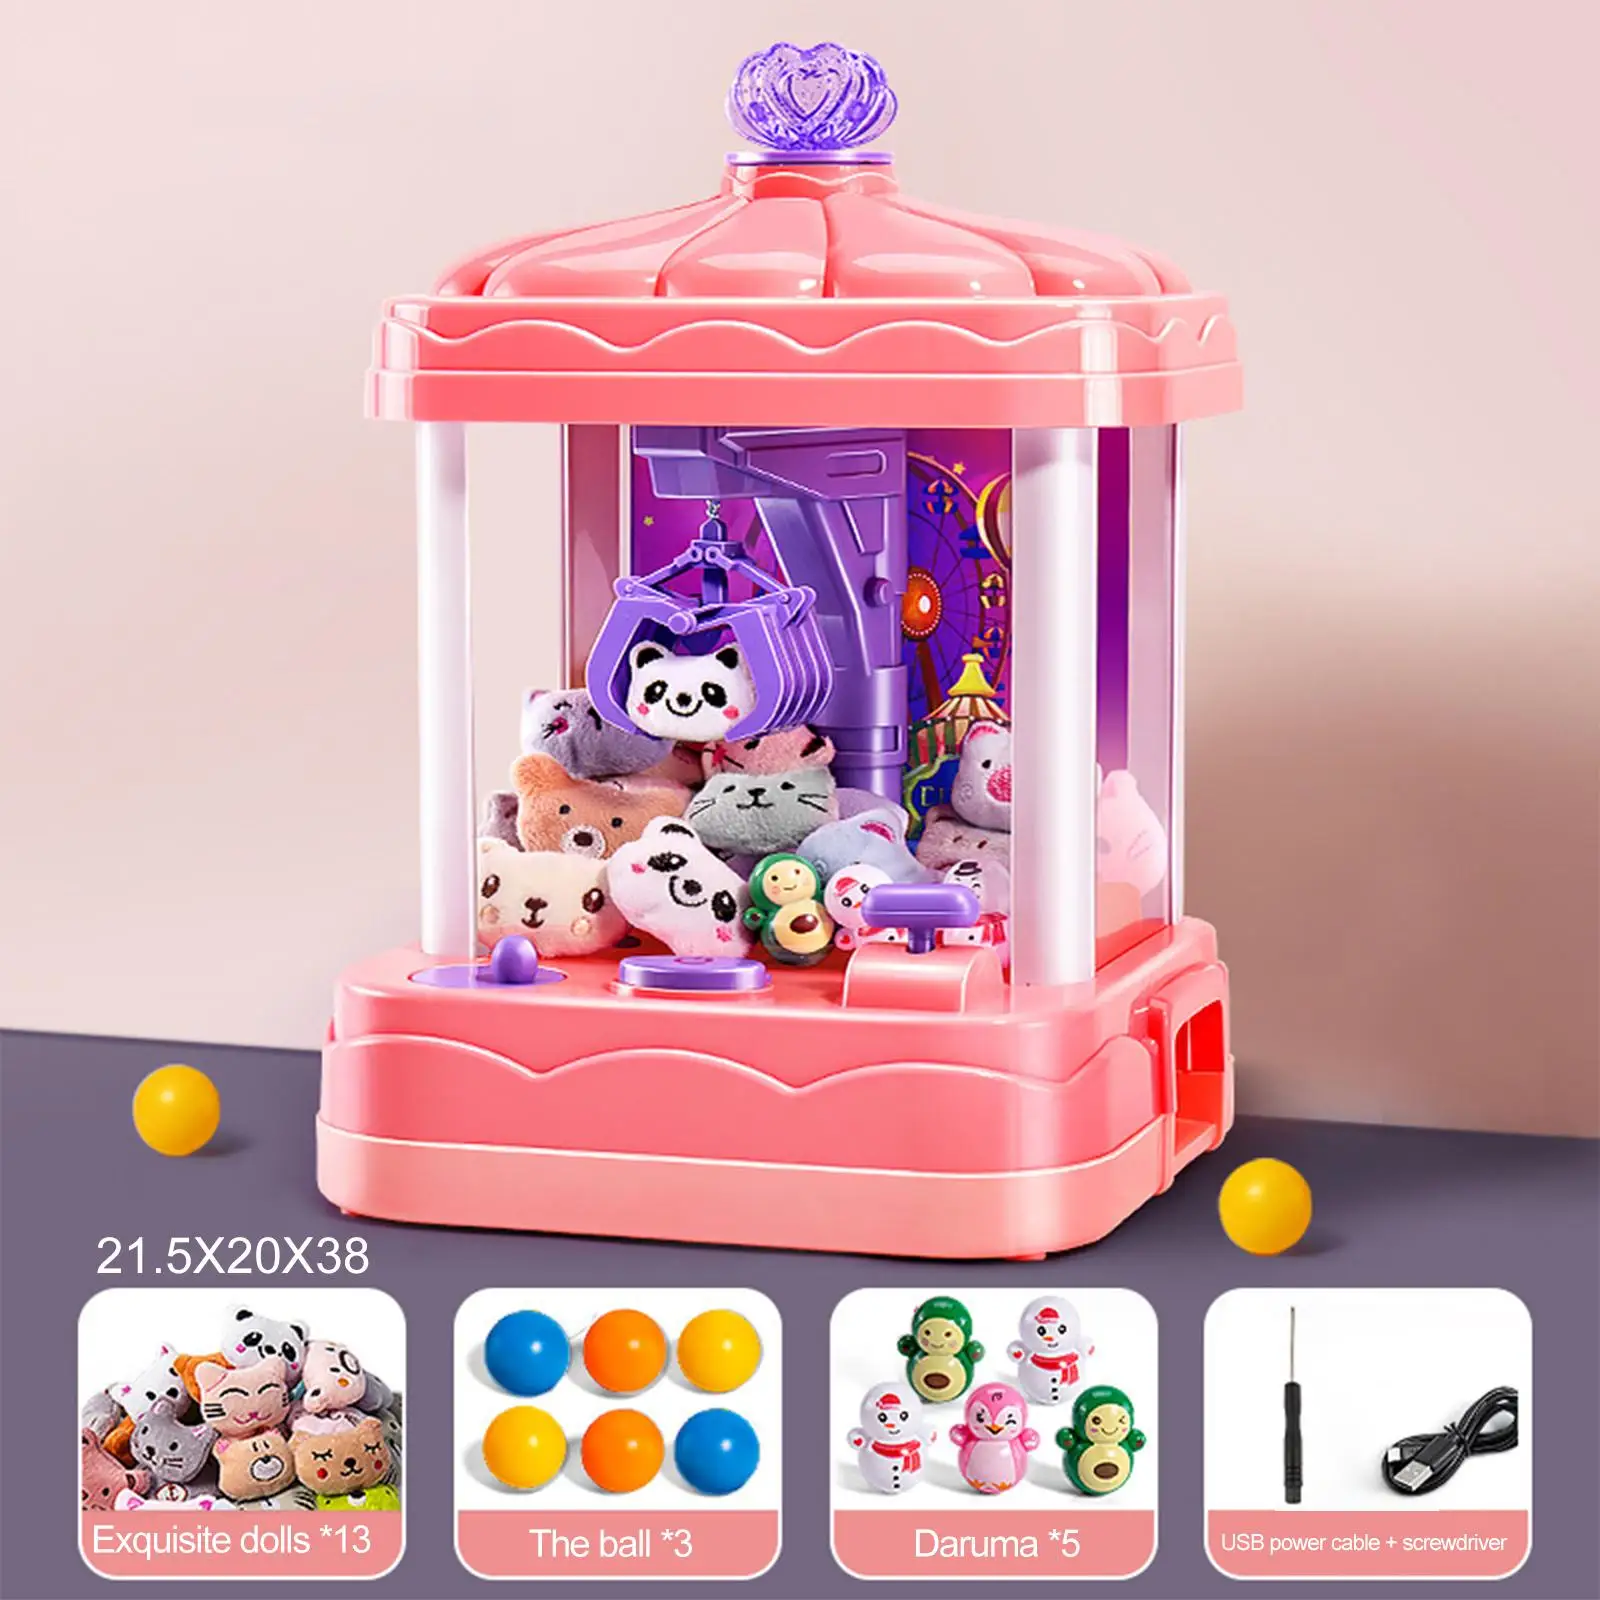 Children Claw Machine Doll Machine Claw Toy Two Power Supply Modes , 360 Degree Rotating Joystick Control DIY Play Game Safe